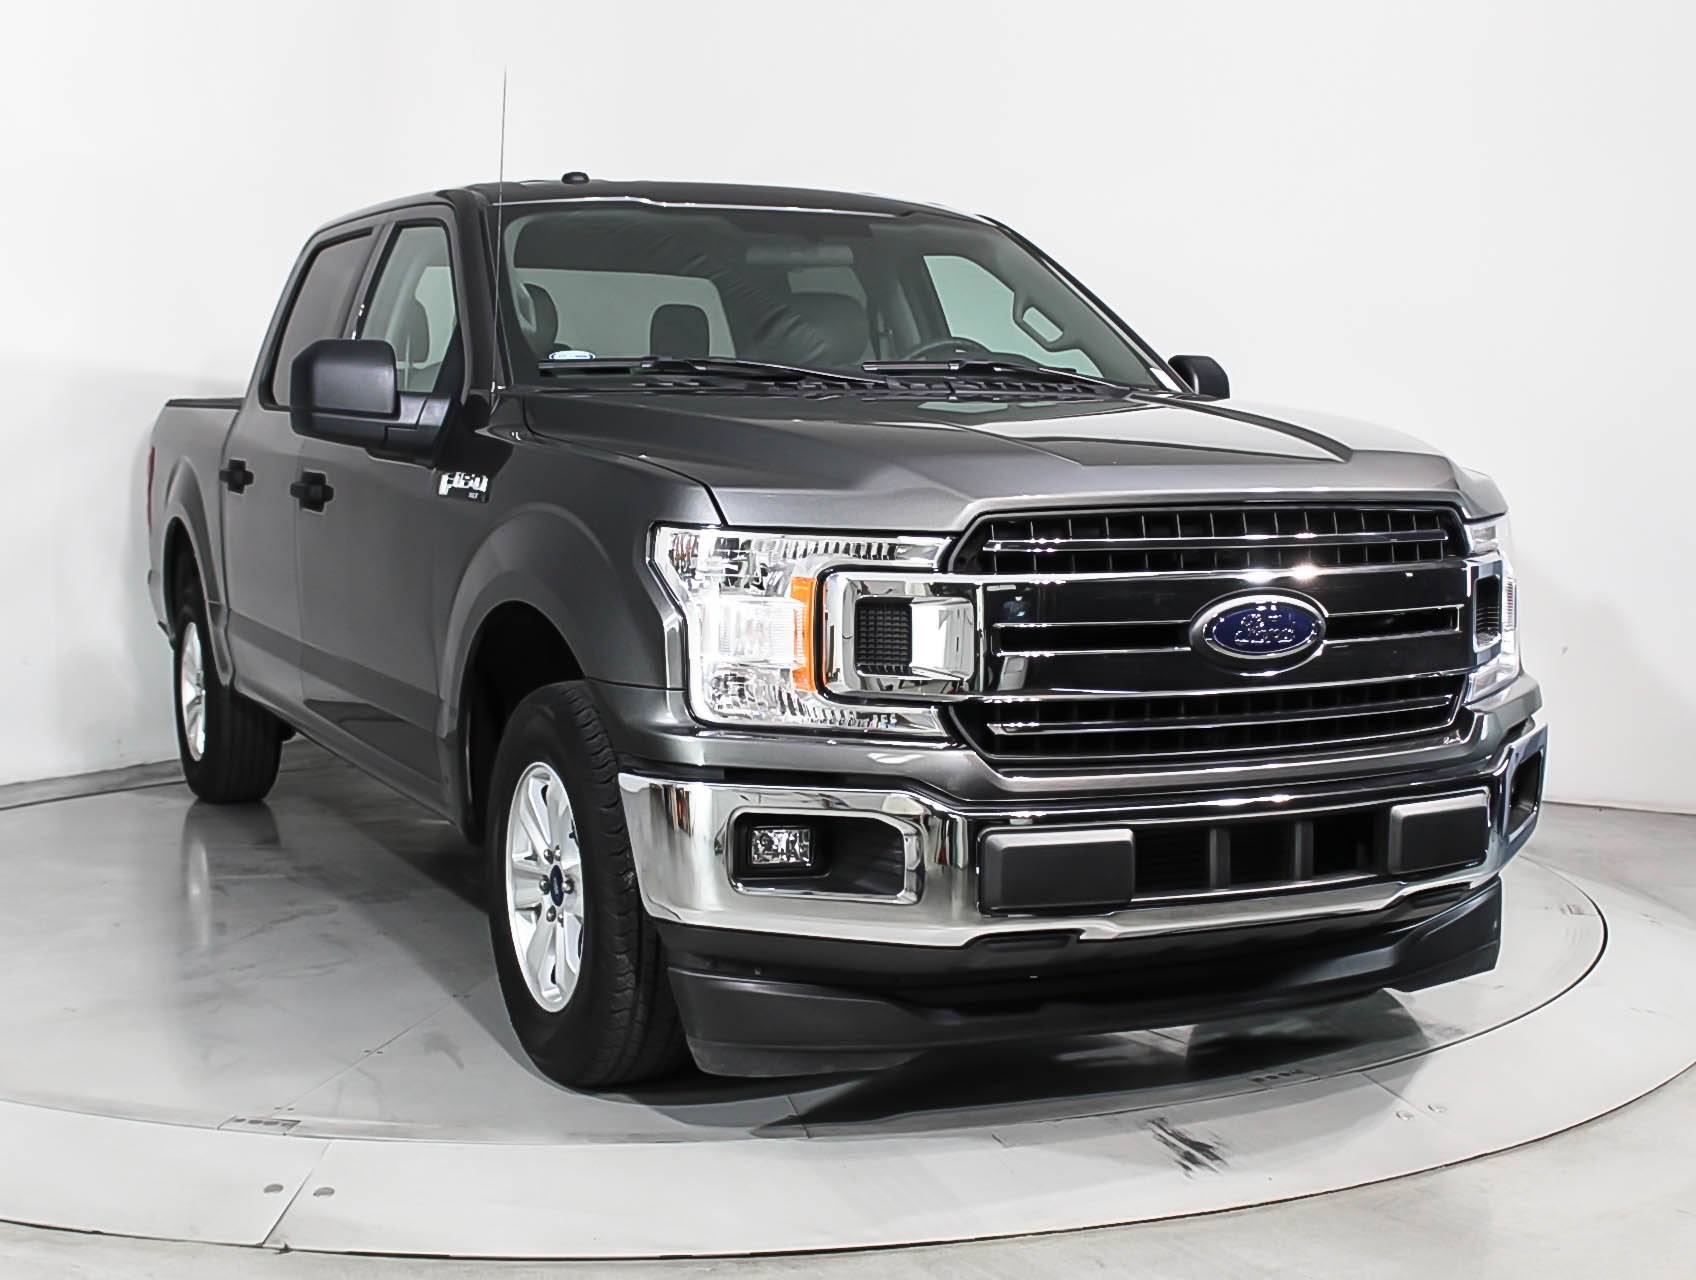 Florida Fine Cars - Used FORD F 150 2018 MIAMI Xlt Ecoboost